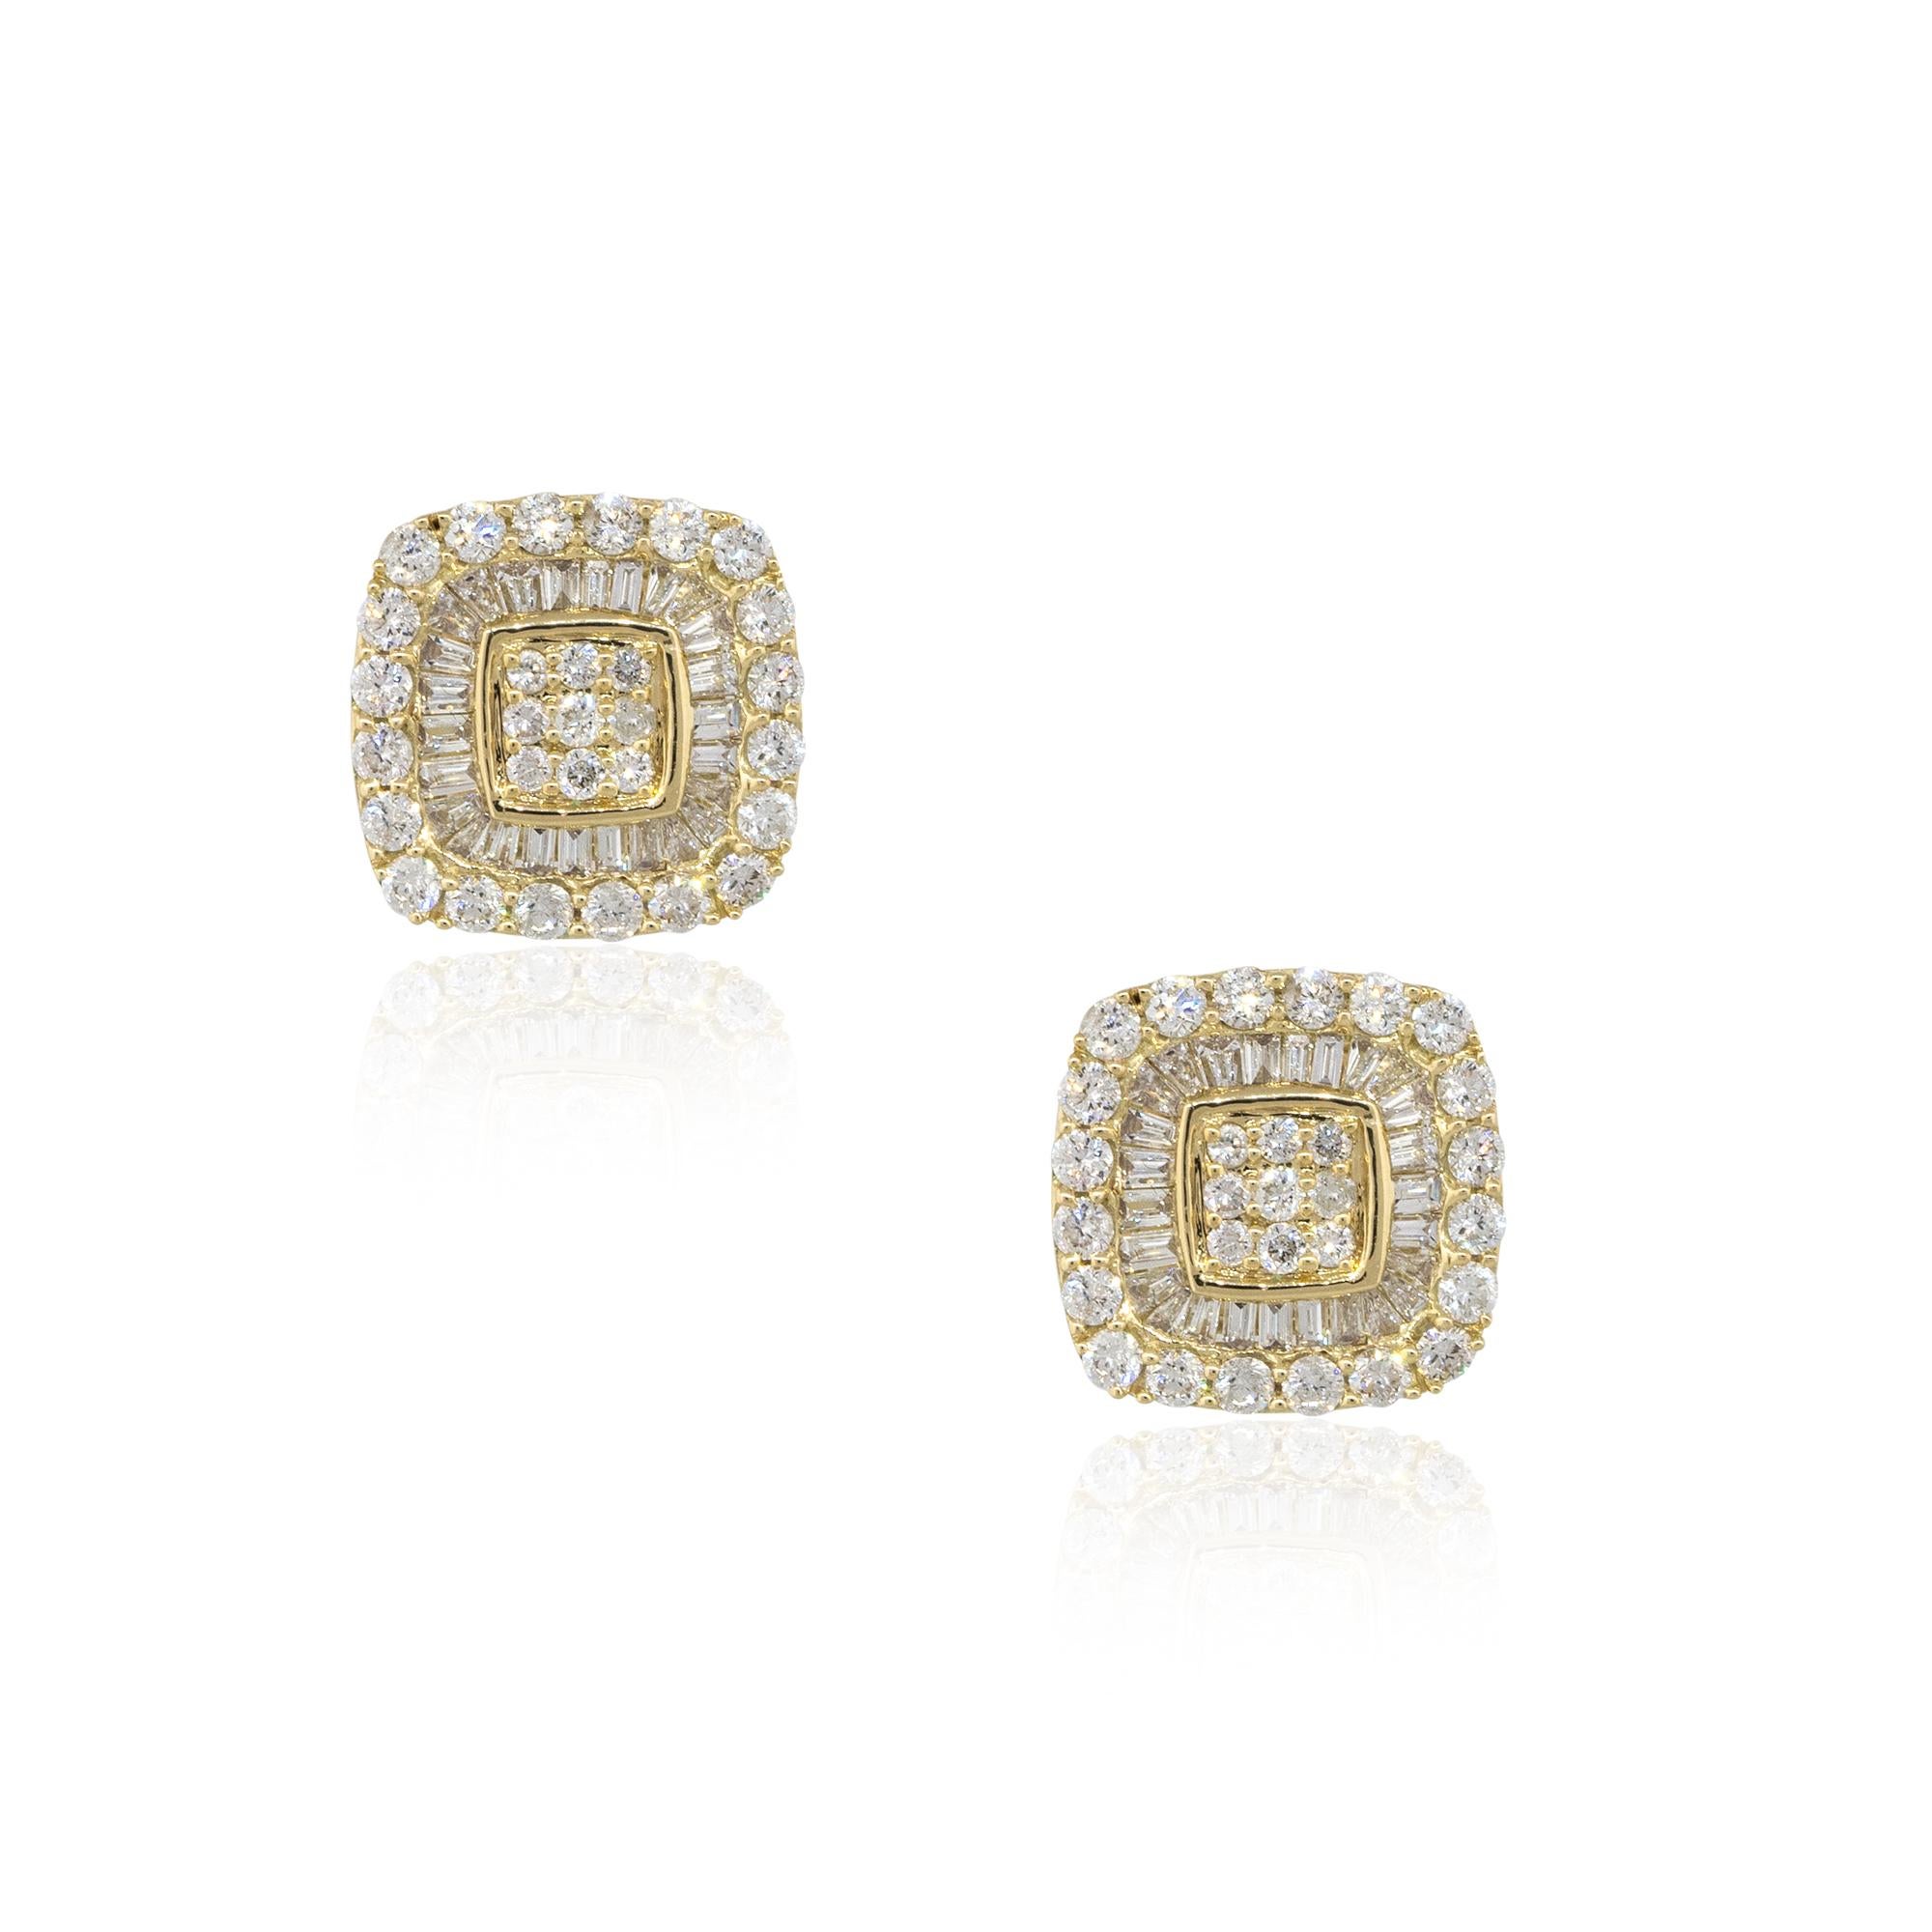 Material: 14k White Gold
Diamond Details: Approx. 0.66ctw of round and invisible set baguette Diamonds. Diamonds are G/H in color and VS in clarity.
Measurements: 10.30mm x 15.30mm x 10.30mm
Earrings Backs: Tension posts
Total Weight: 3.7g